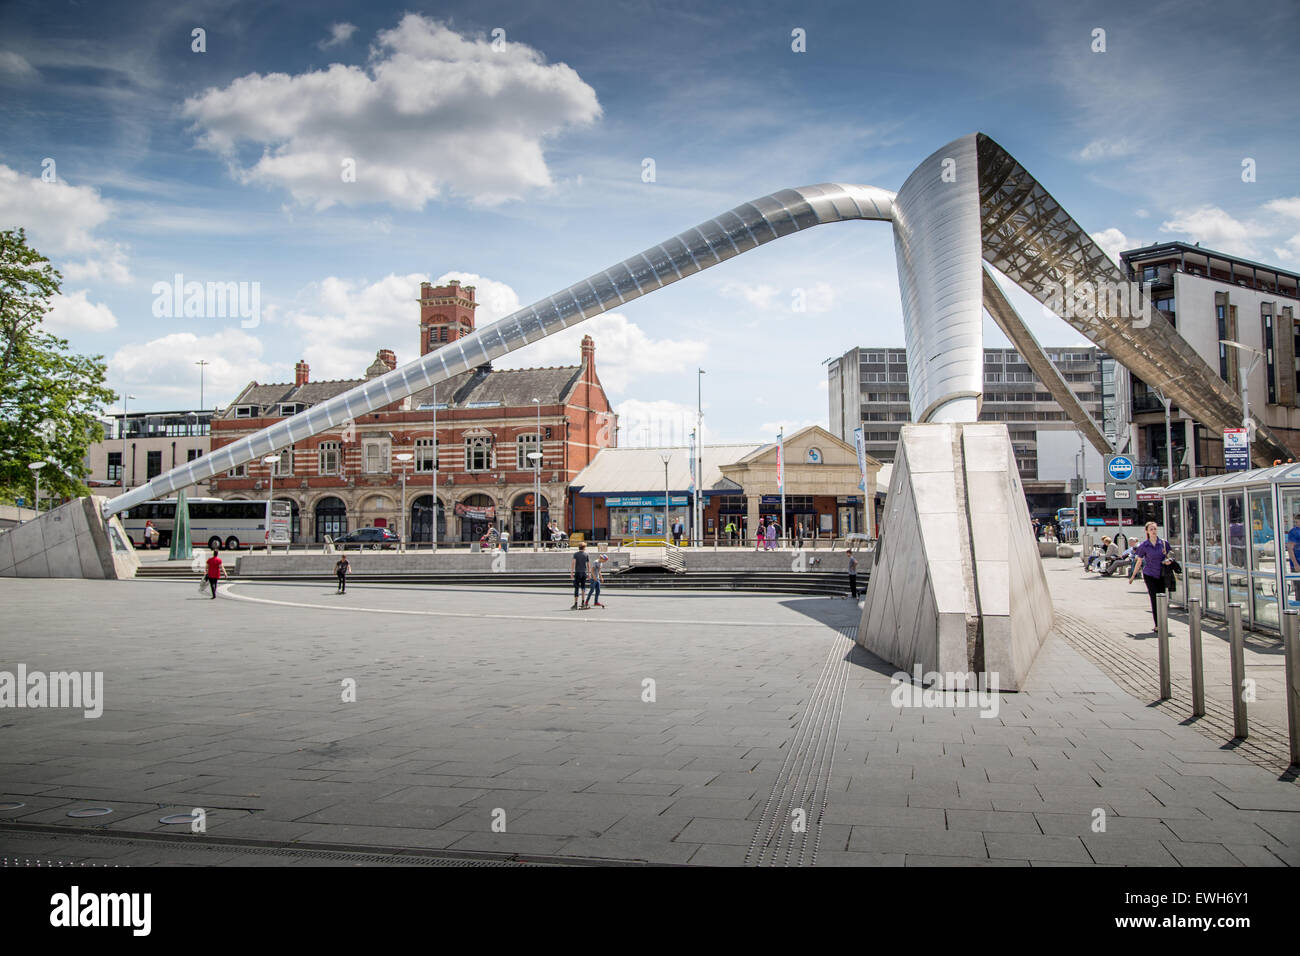 The Whittle Arch sculpture in Coventry city centre Stock Photo